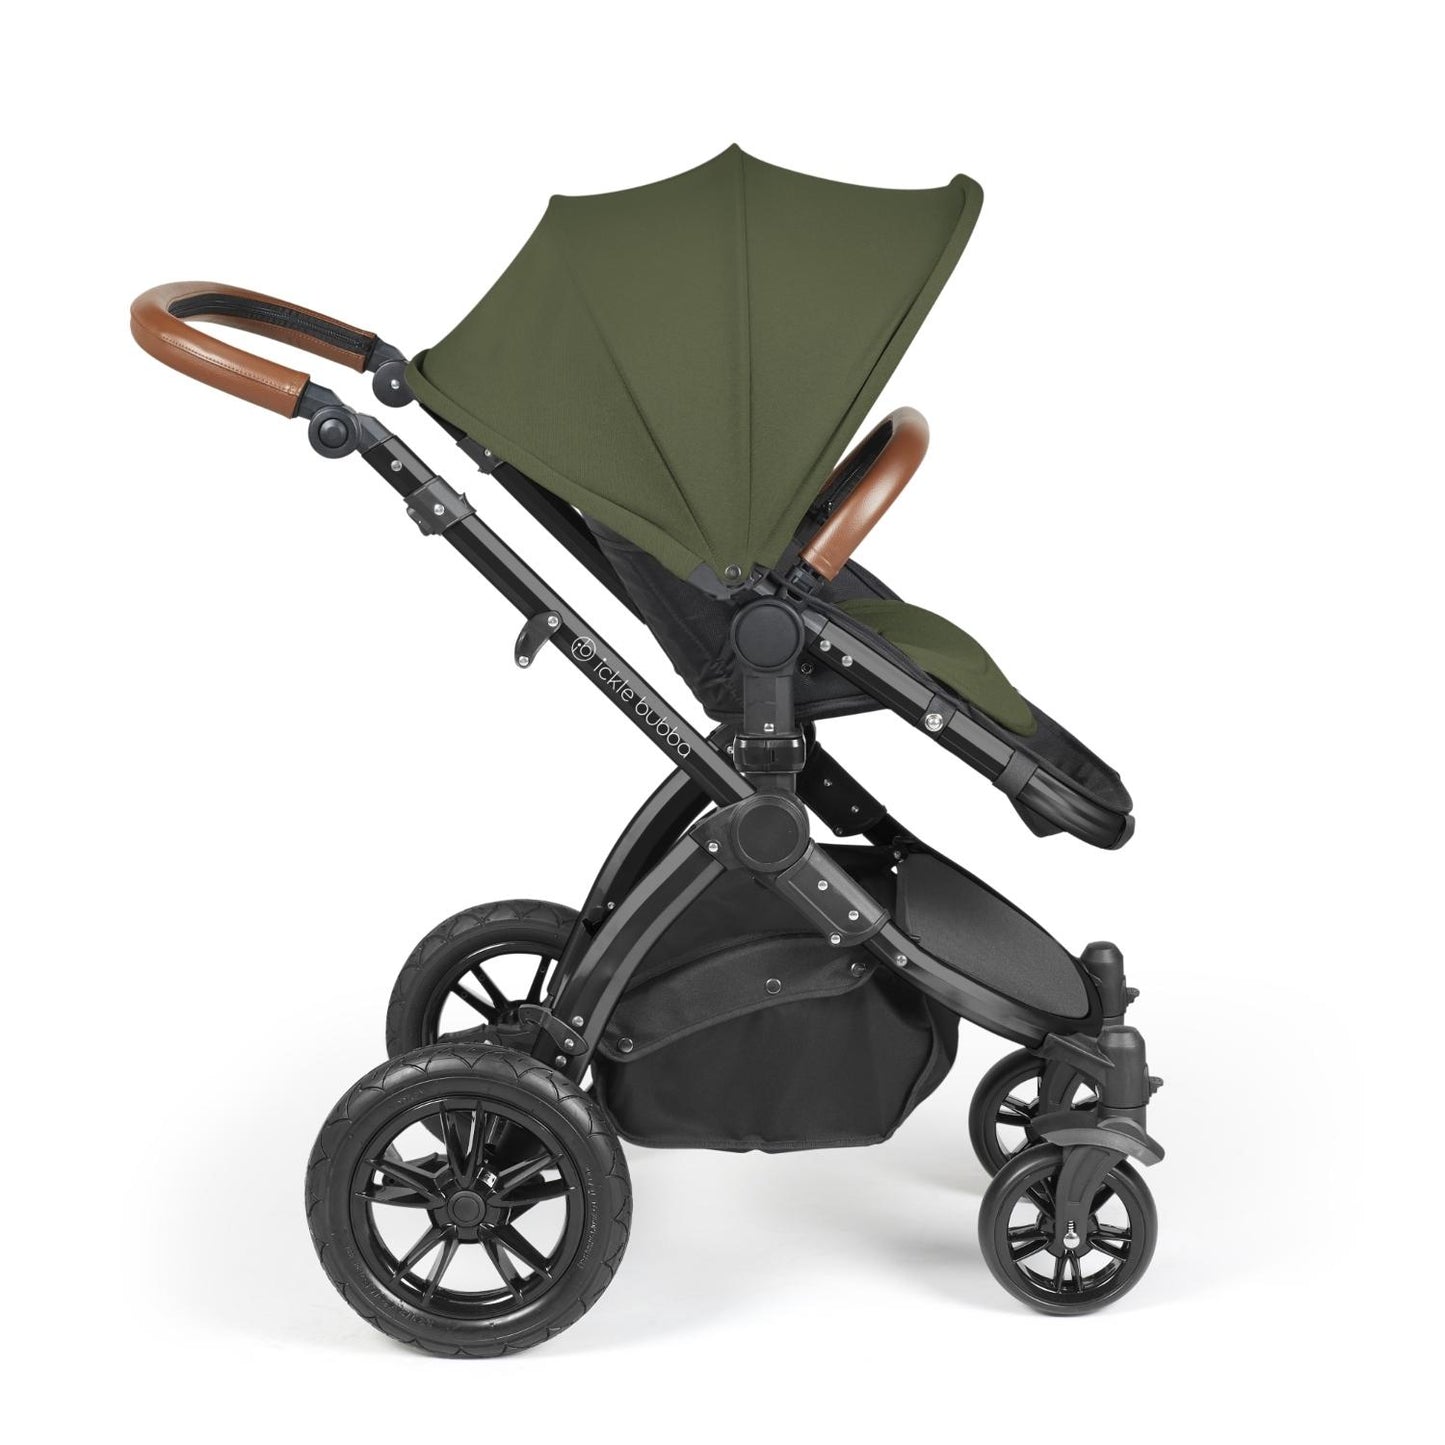 Recline position of Ickle Bubba Stomp Luxe Pushchair in Woodland green colour with tan handle